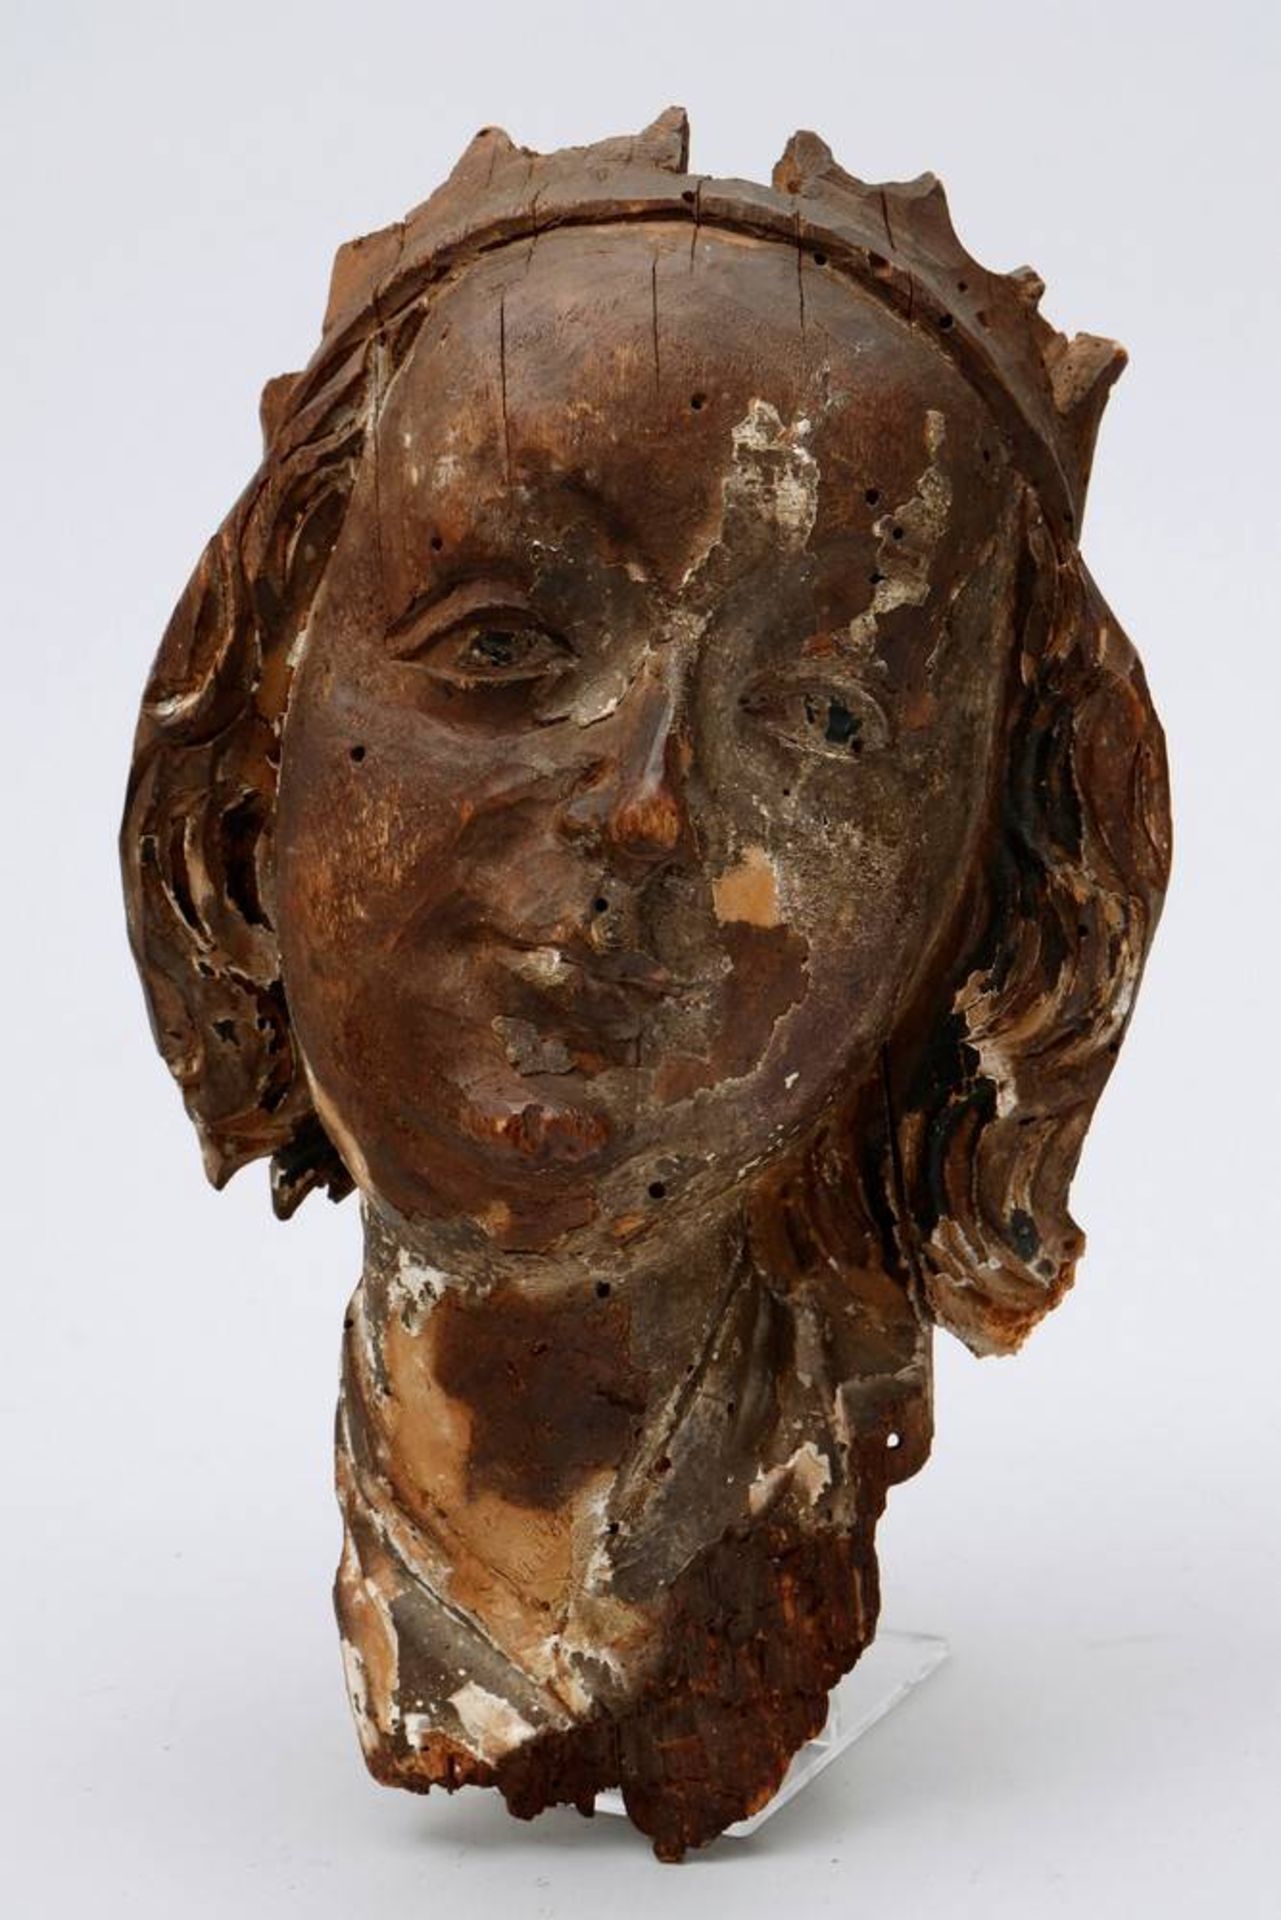 Mater Dolorosaposs. south german, 17th C., carved wood, painted in colours, head fragment, H 23cm,